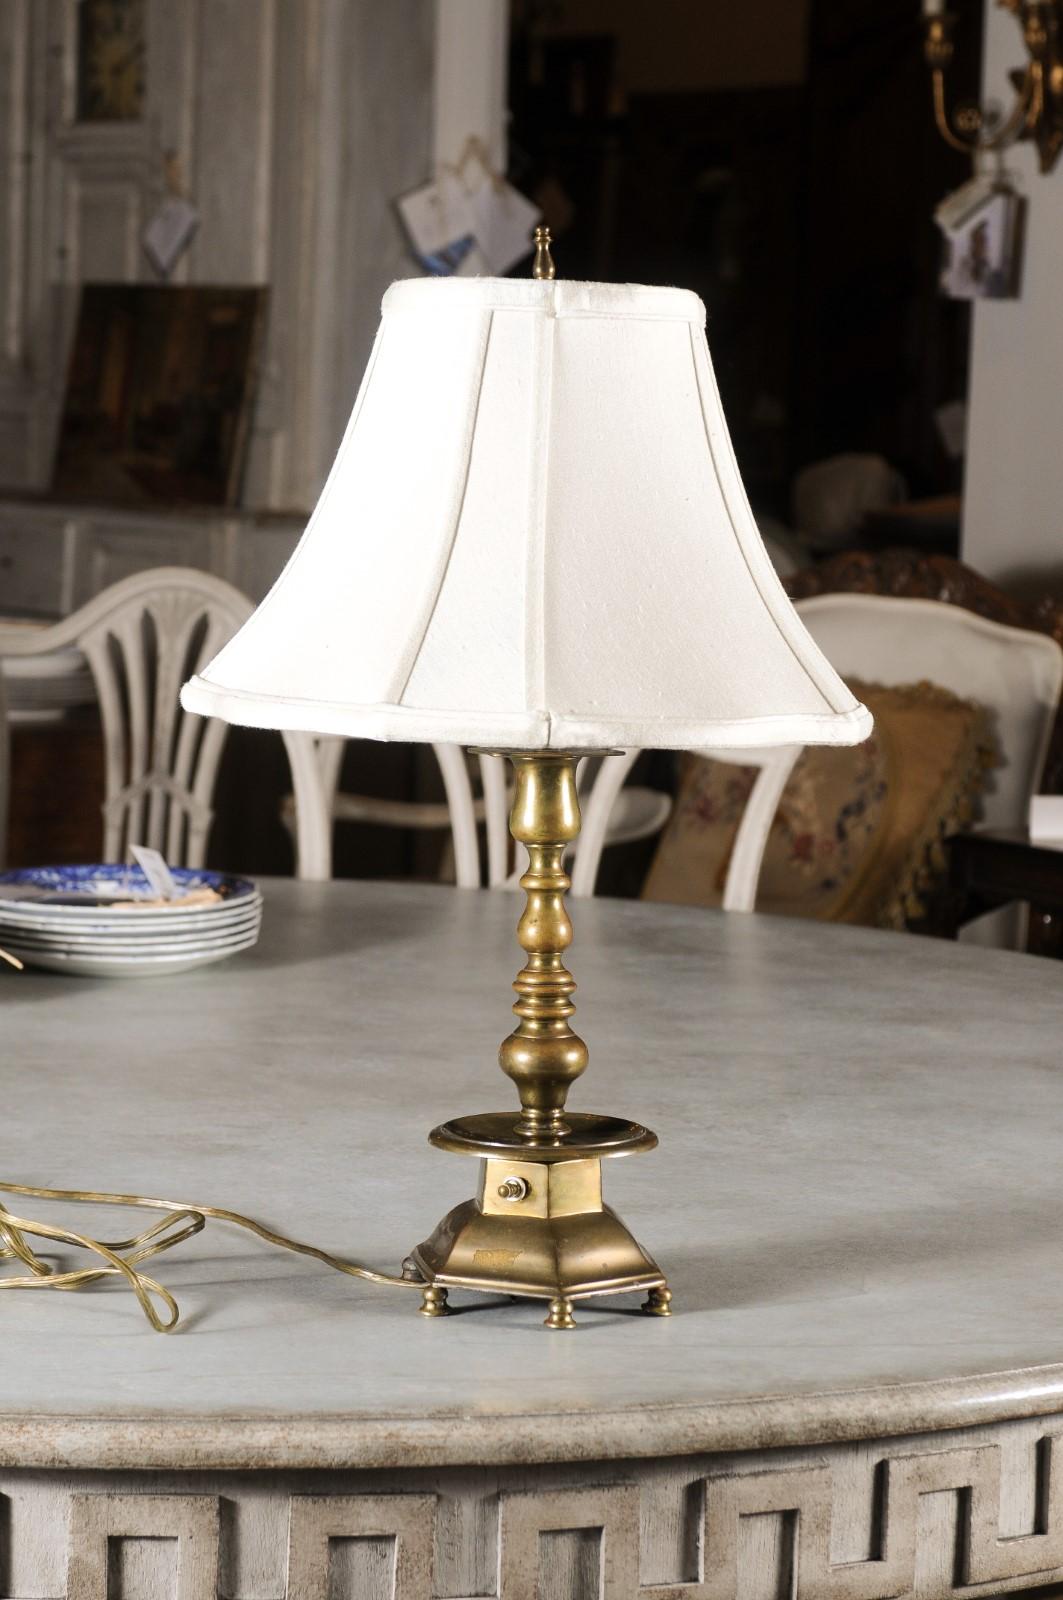 19th Century French Napoléon III Period 1870s Wired Brass Table Lamp with Hexagonal Base